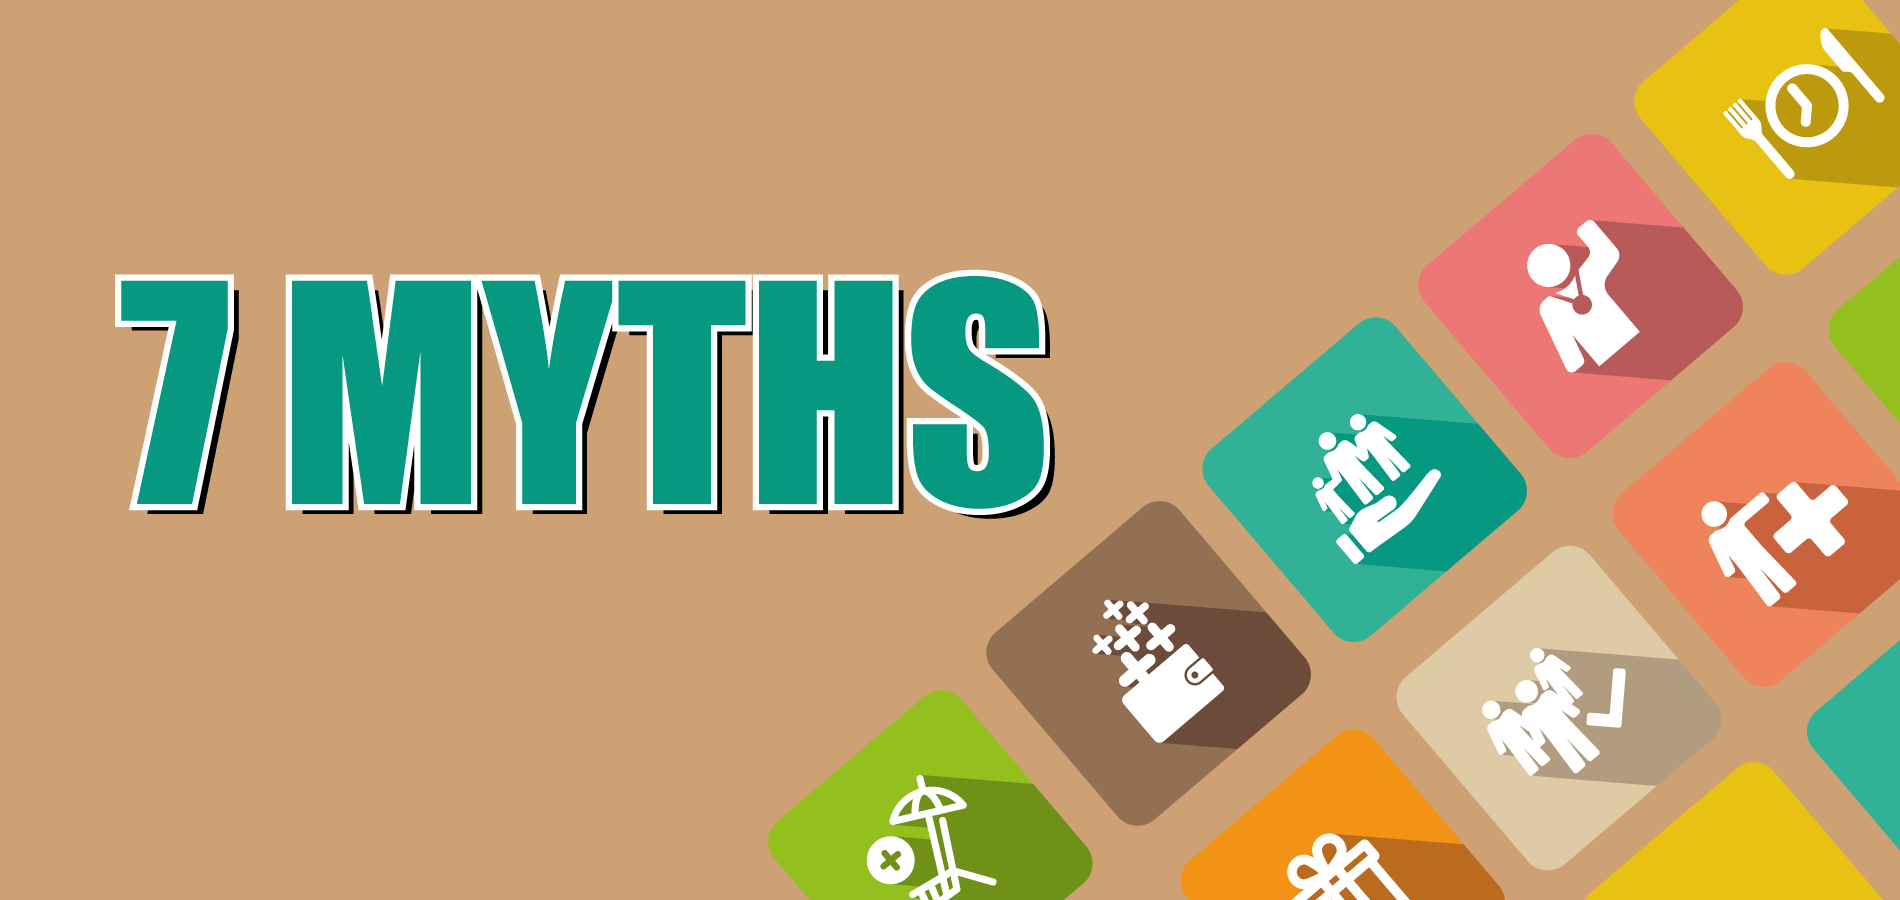 7 myths employee benefits.png